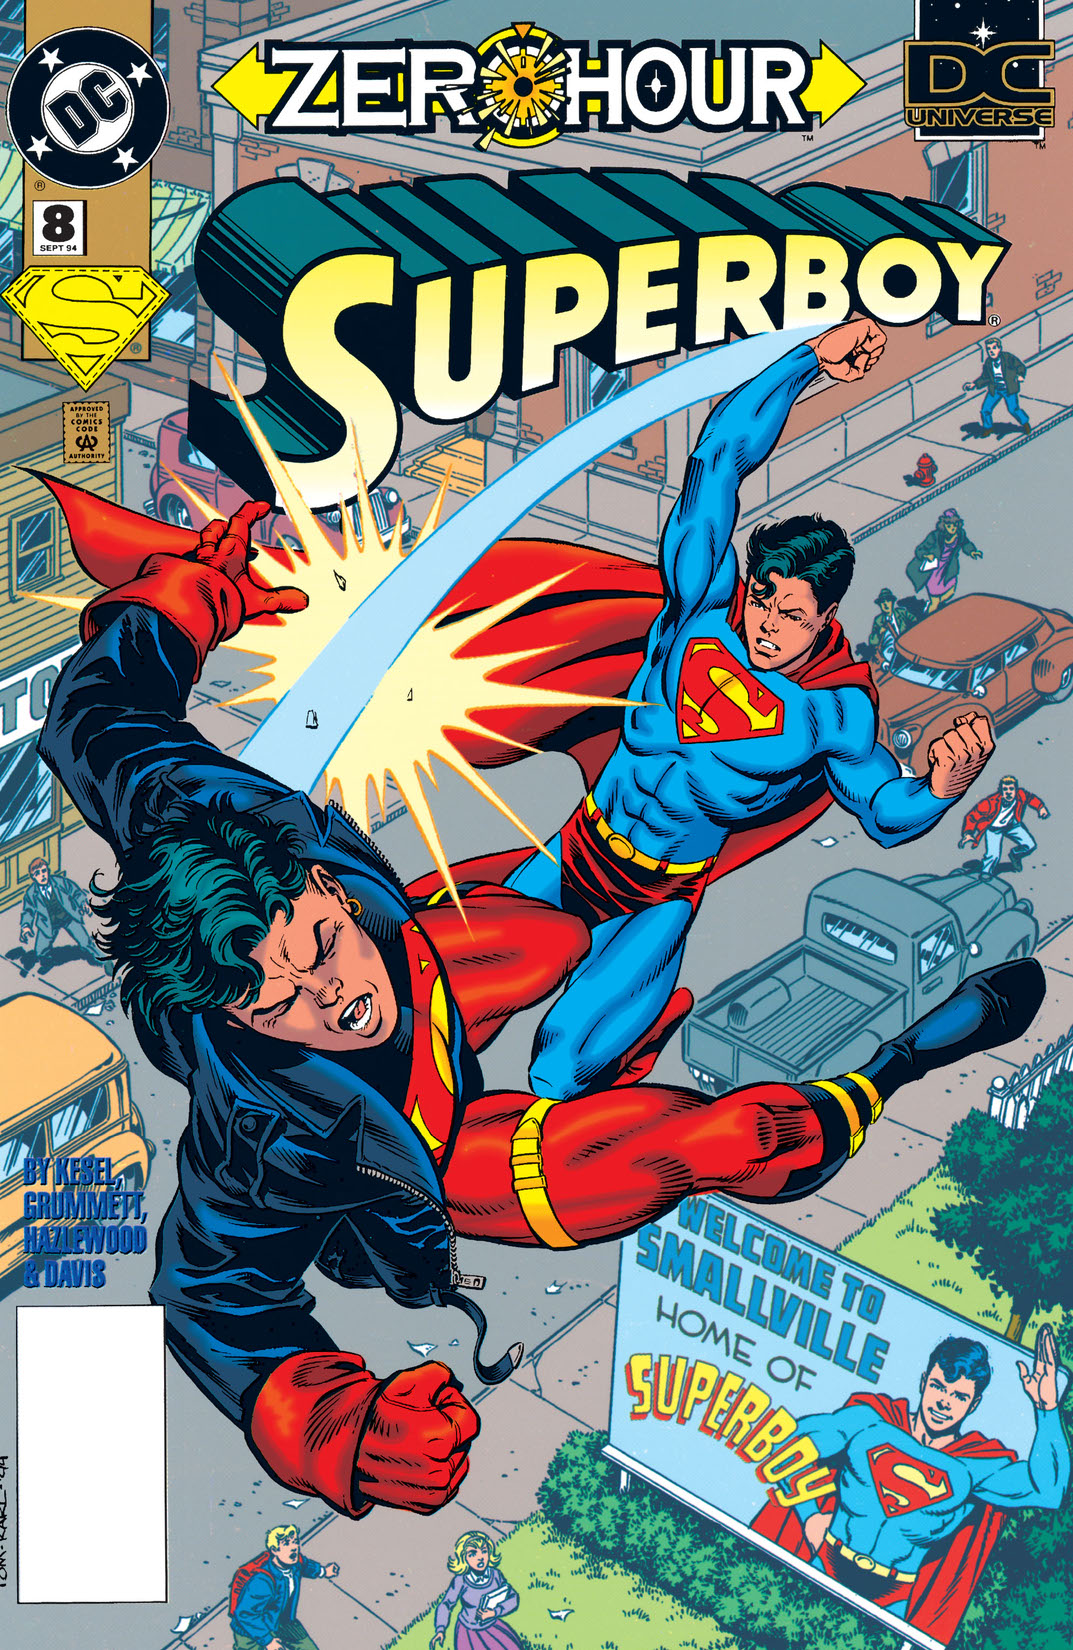 Superboy (1993-) #8 preview images